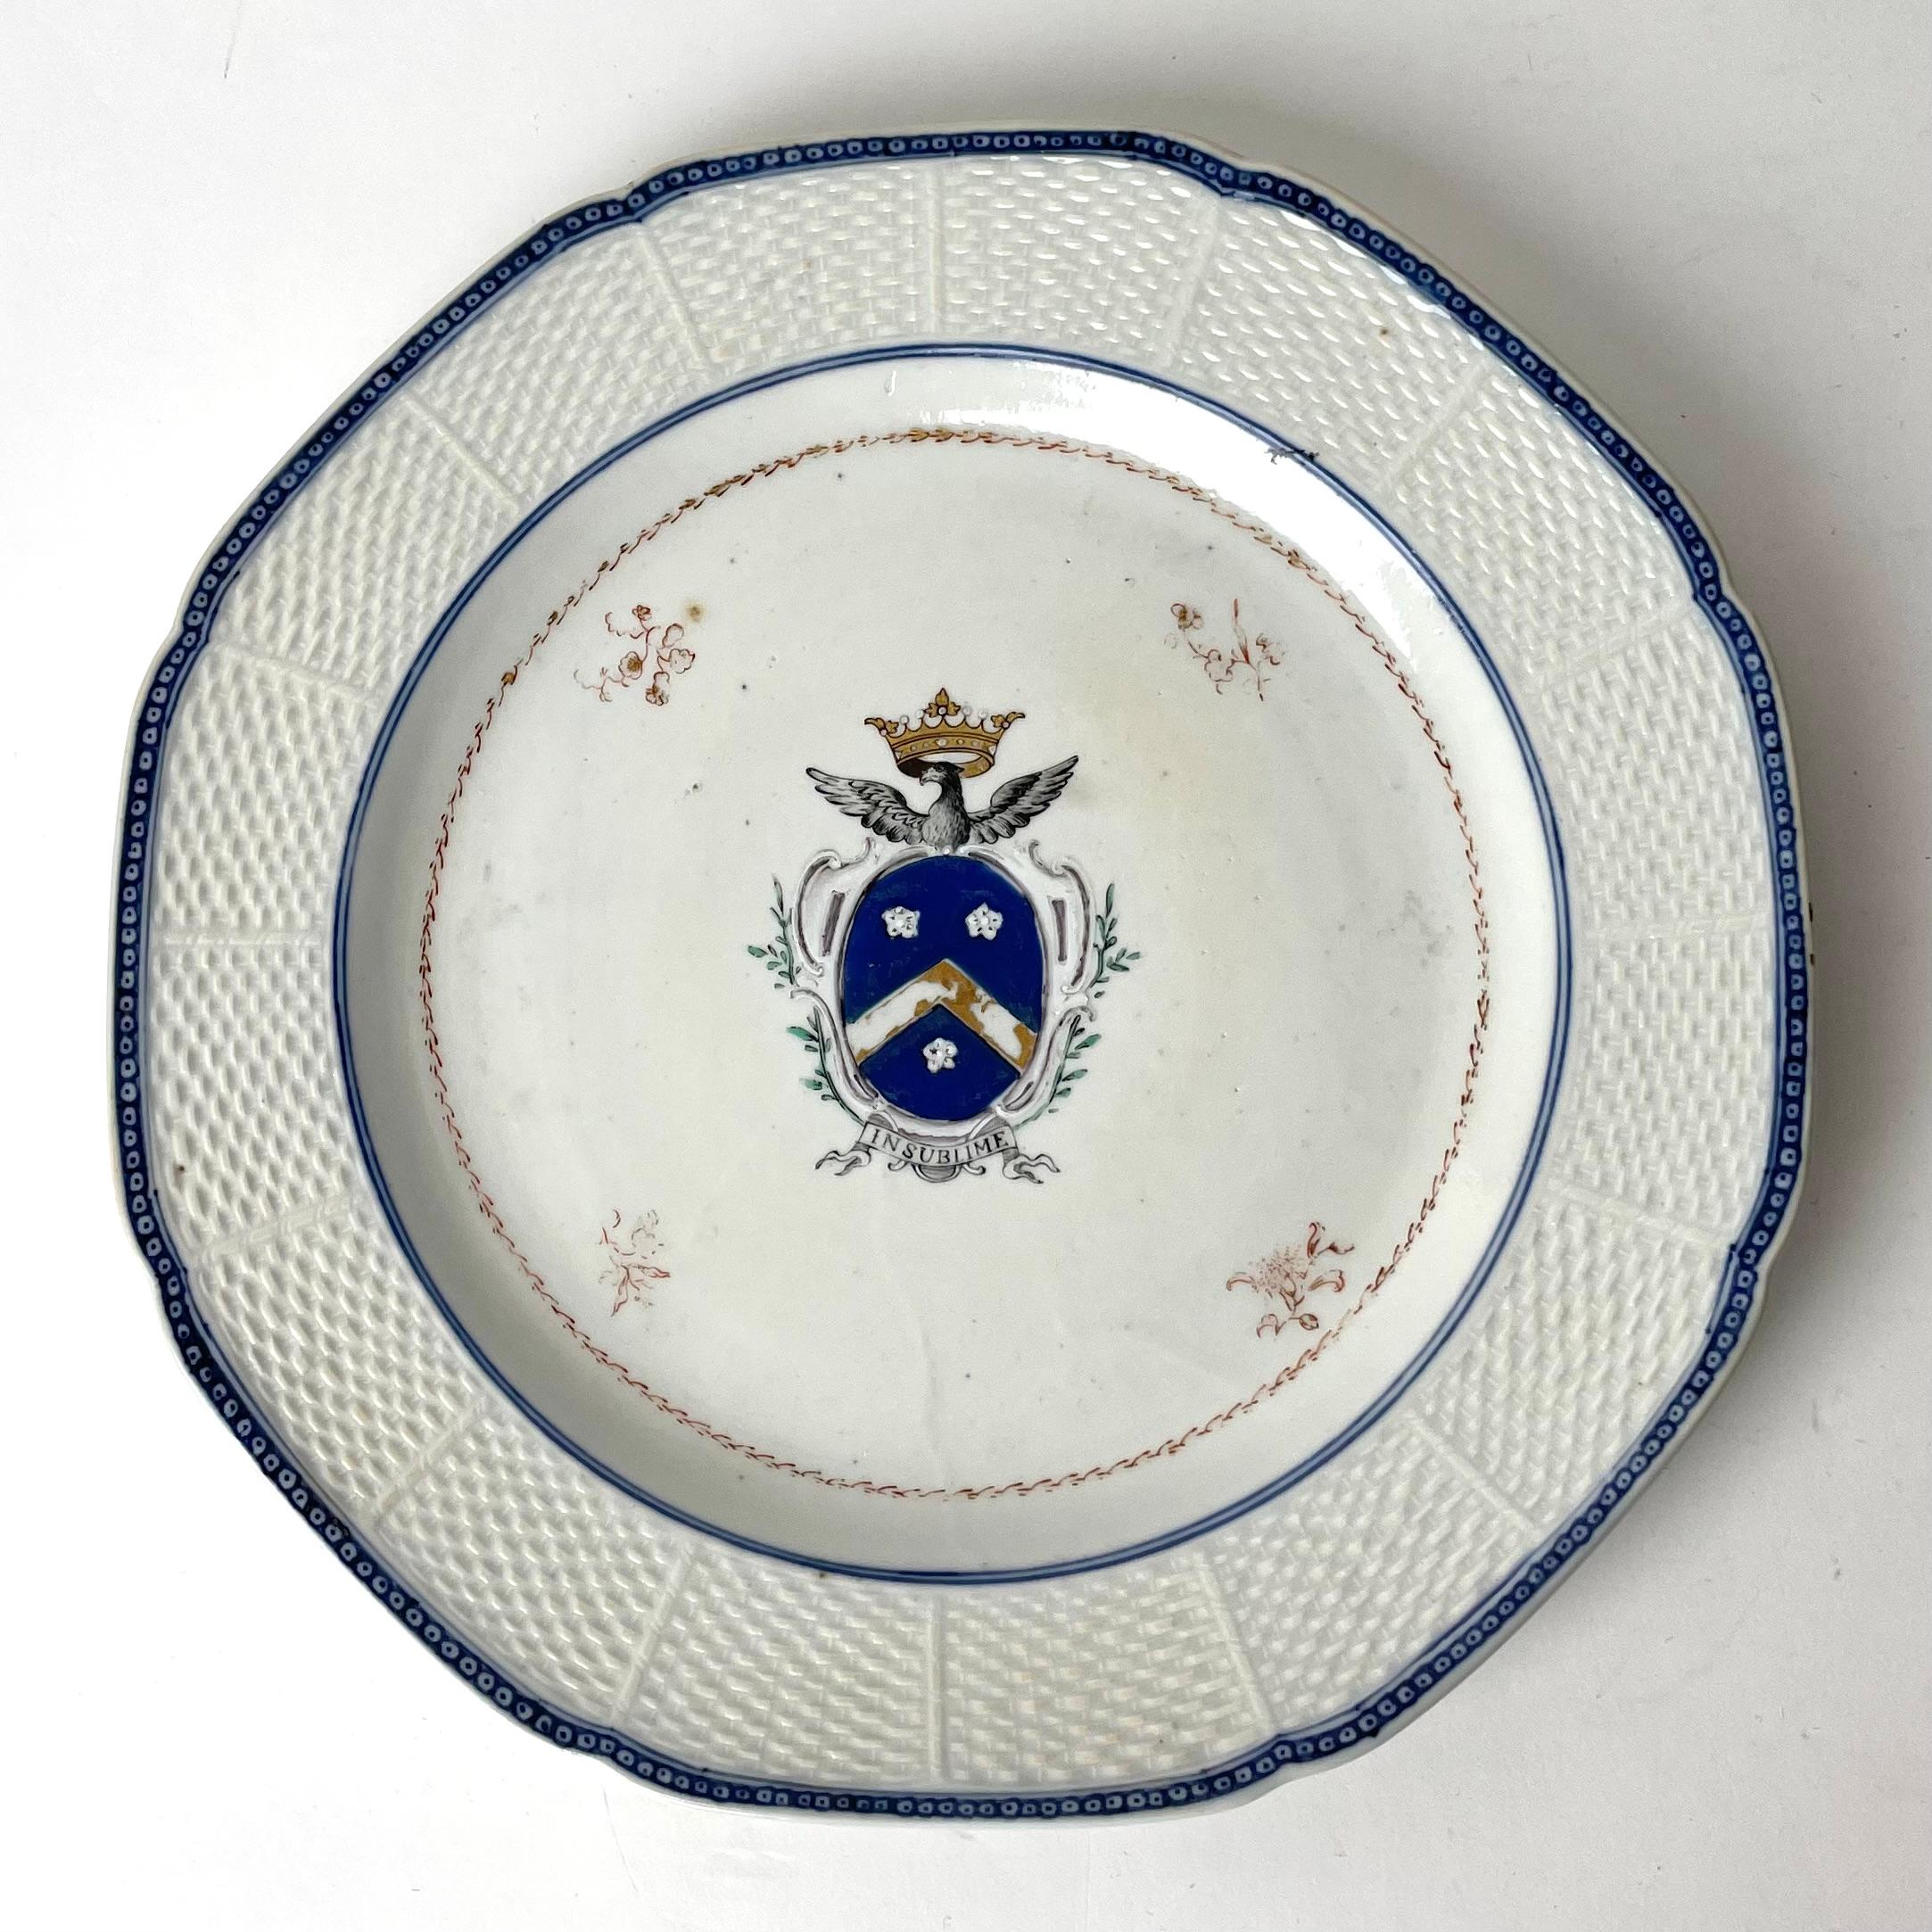 Porcelain Platter with Noble Crest with Crown, 18th Century China

A beautiful Chinese porcelain platter with blue edges and elaborate red decor. Features crest of European noble family; escutcheon with chevron pattern of azure and or (blue and